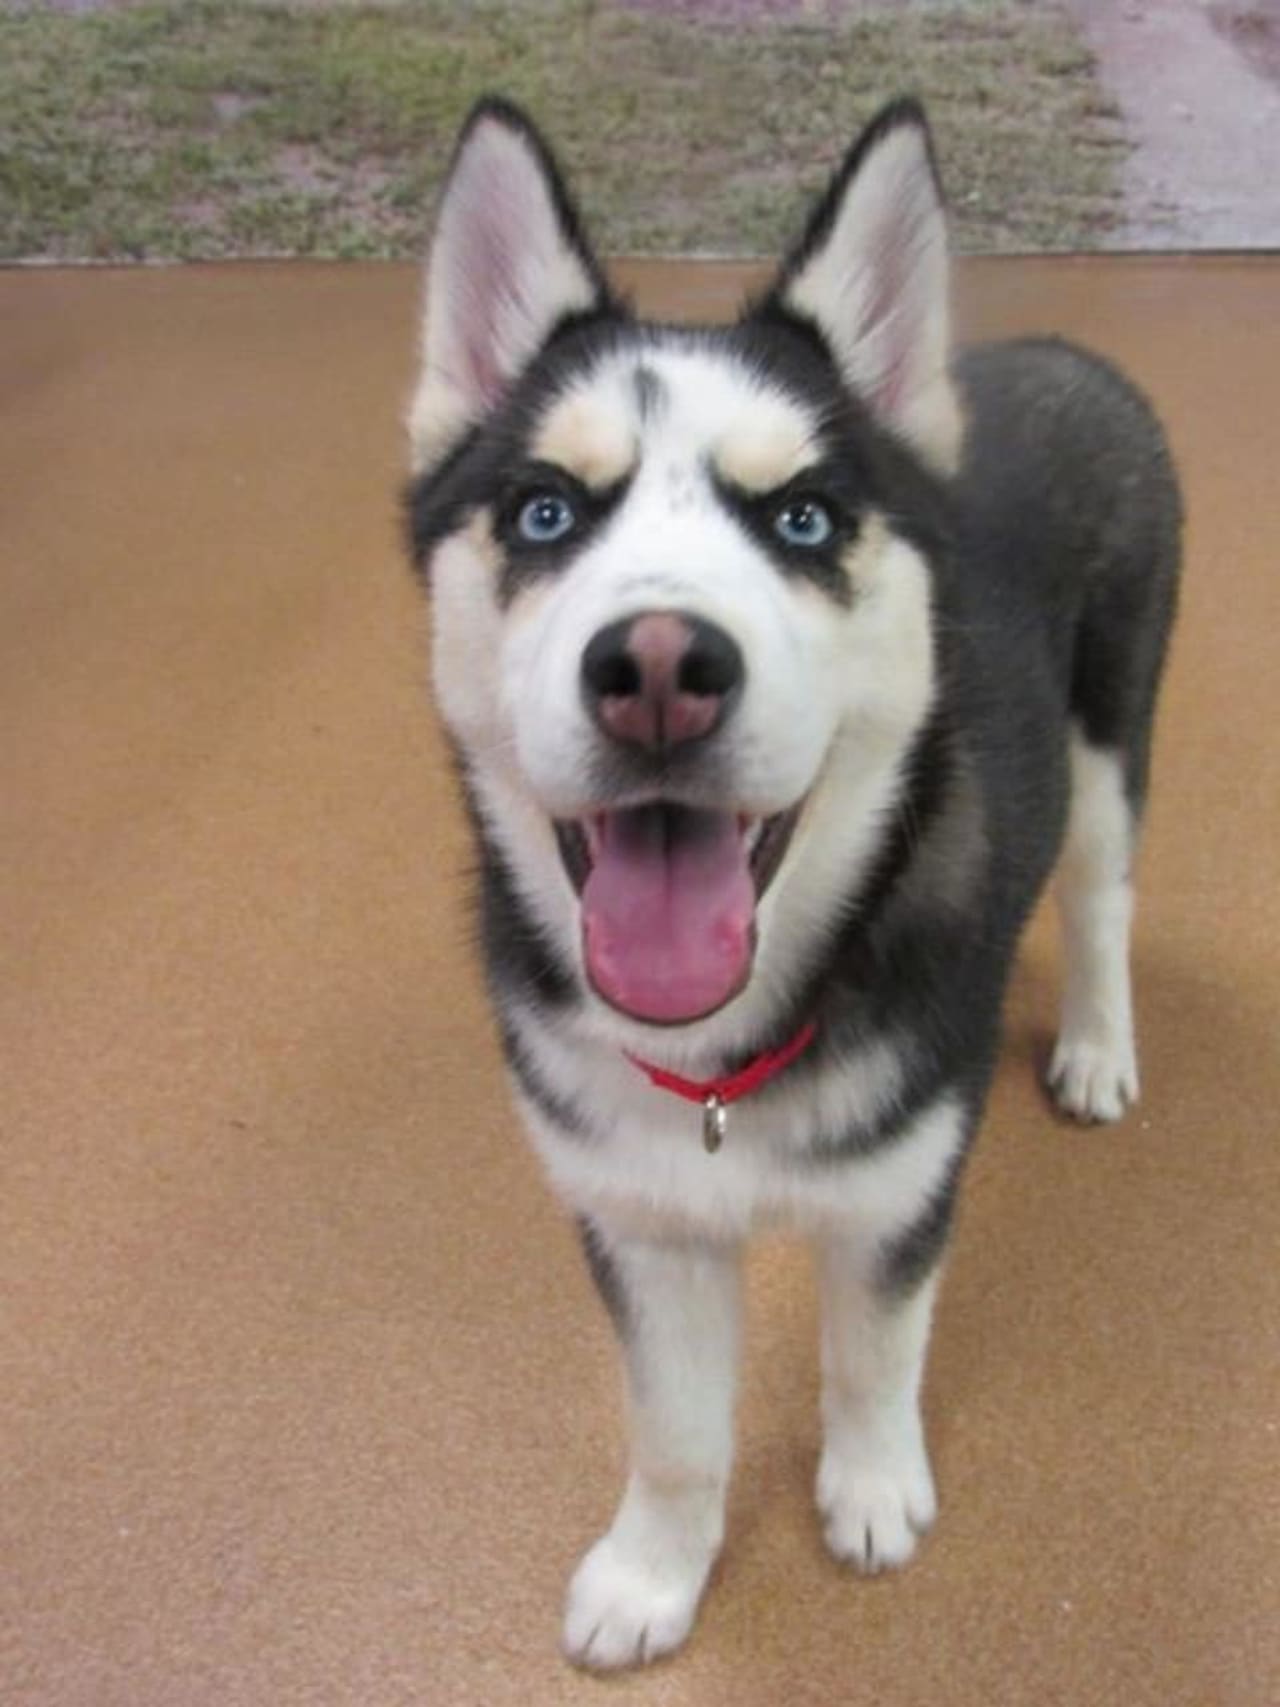 Queen is a Siberian Husky looking for a home.